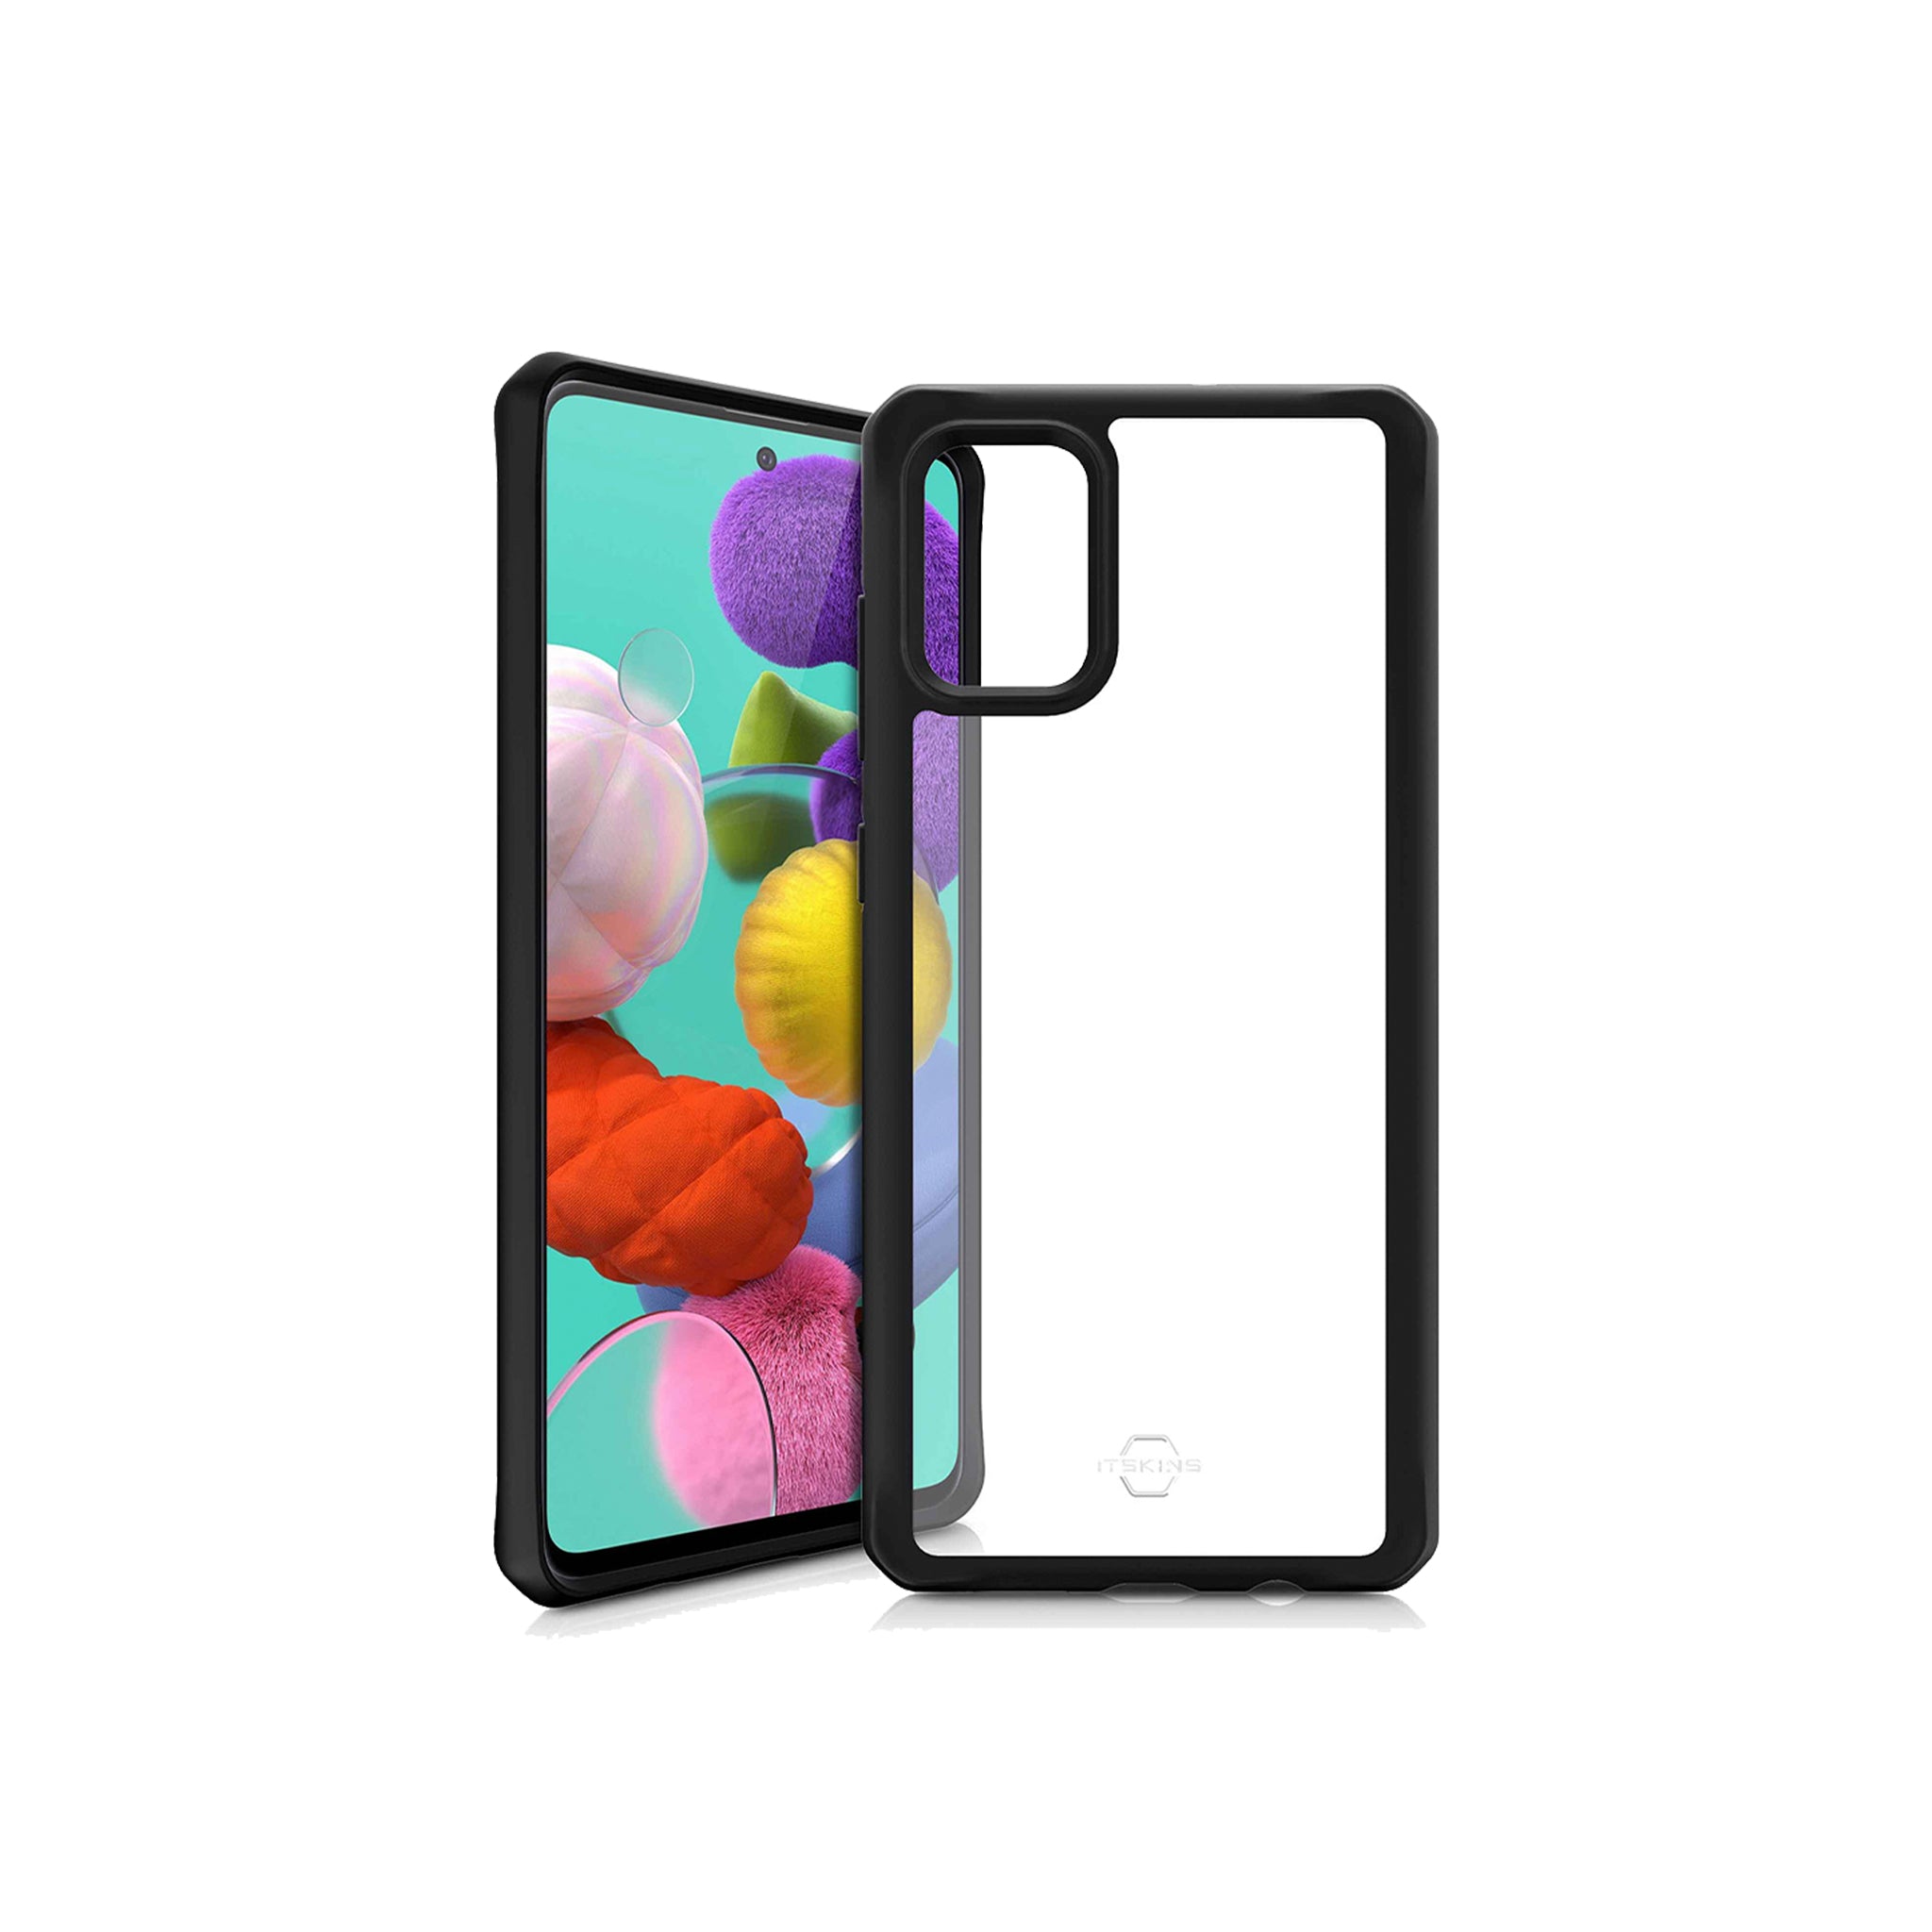 Itskins - Hybrid Solid Case For Samsung Galaxy A51 - Black And Transparent